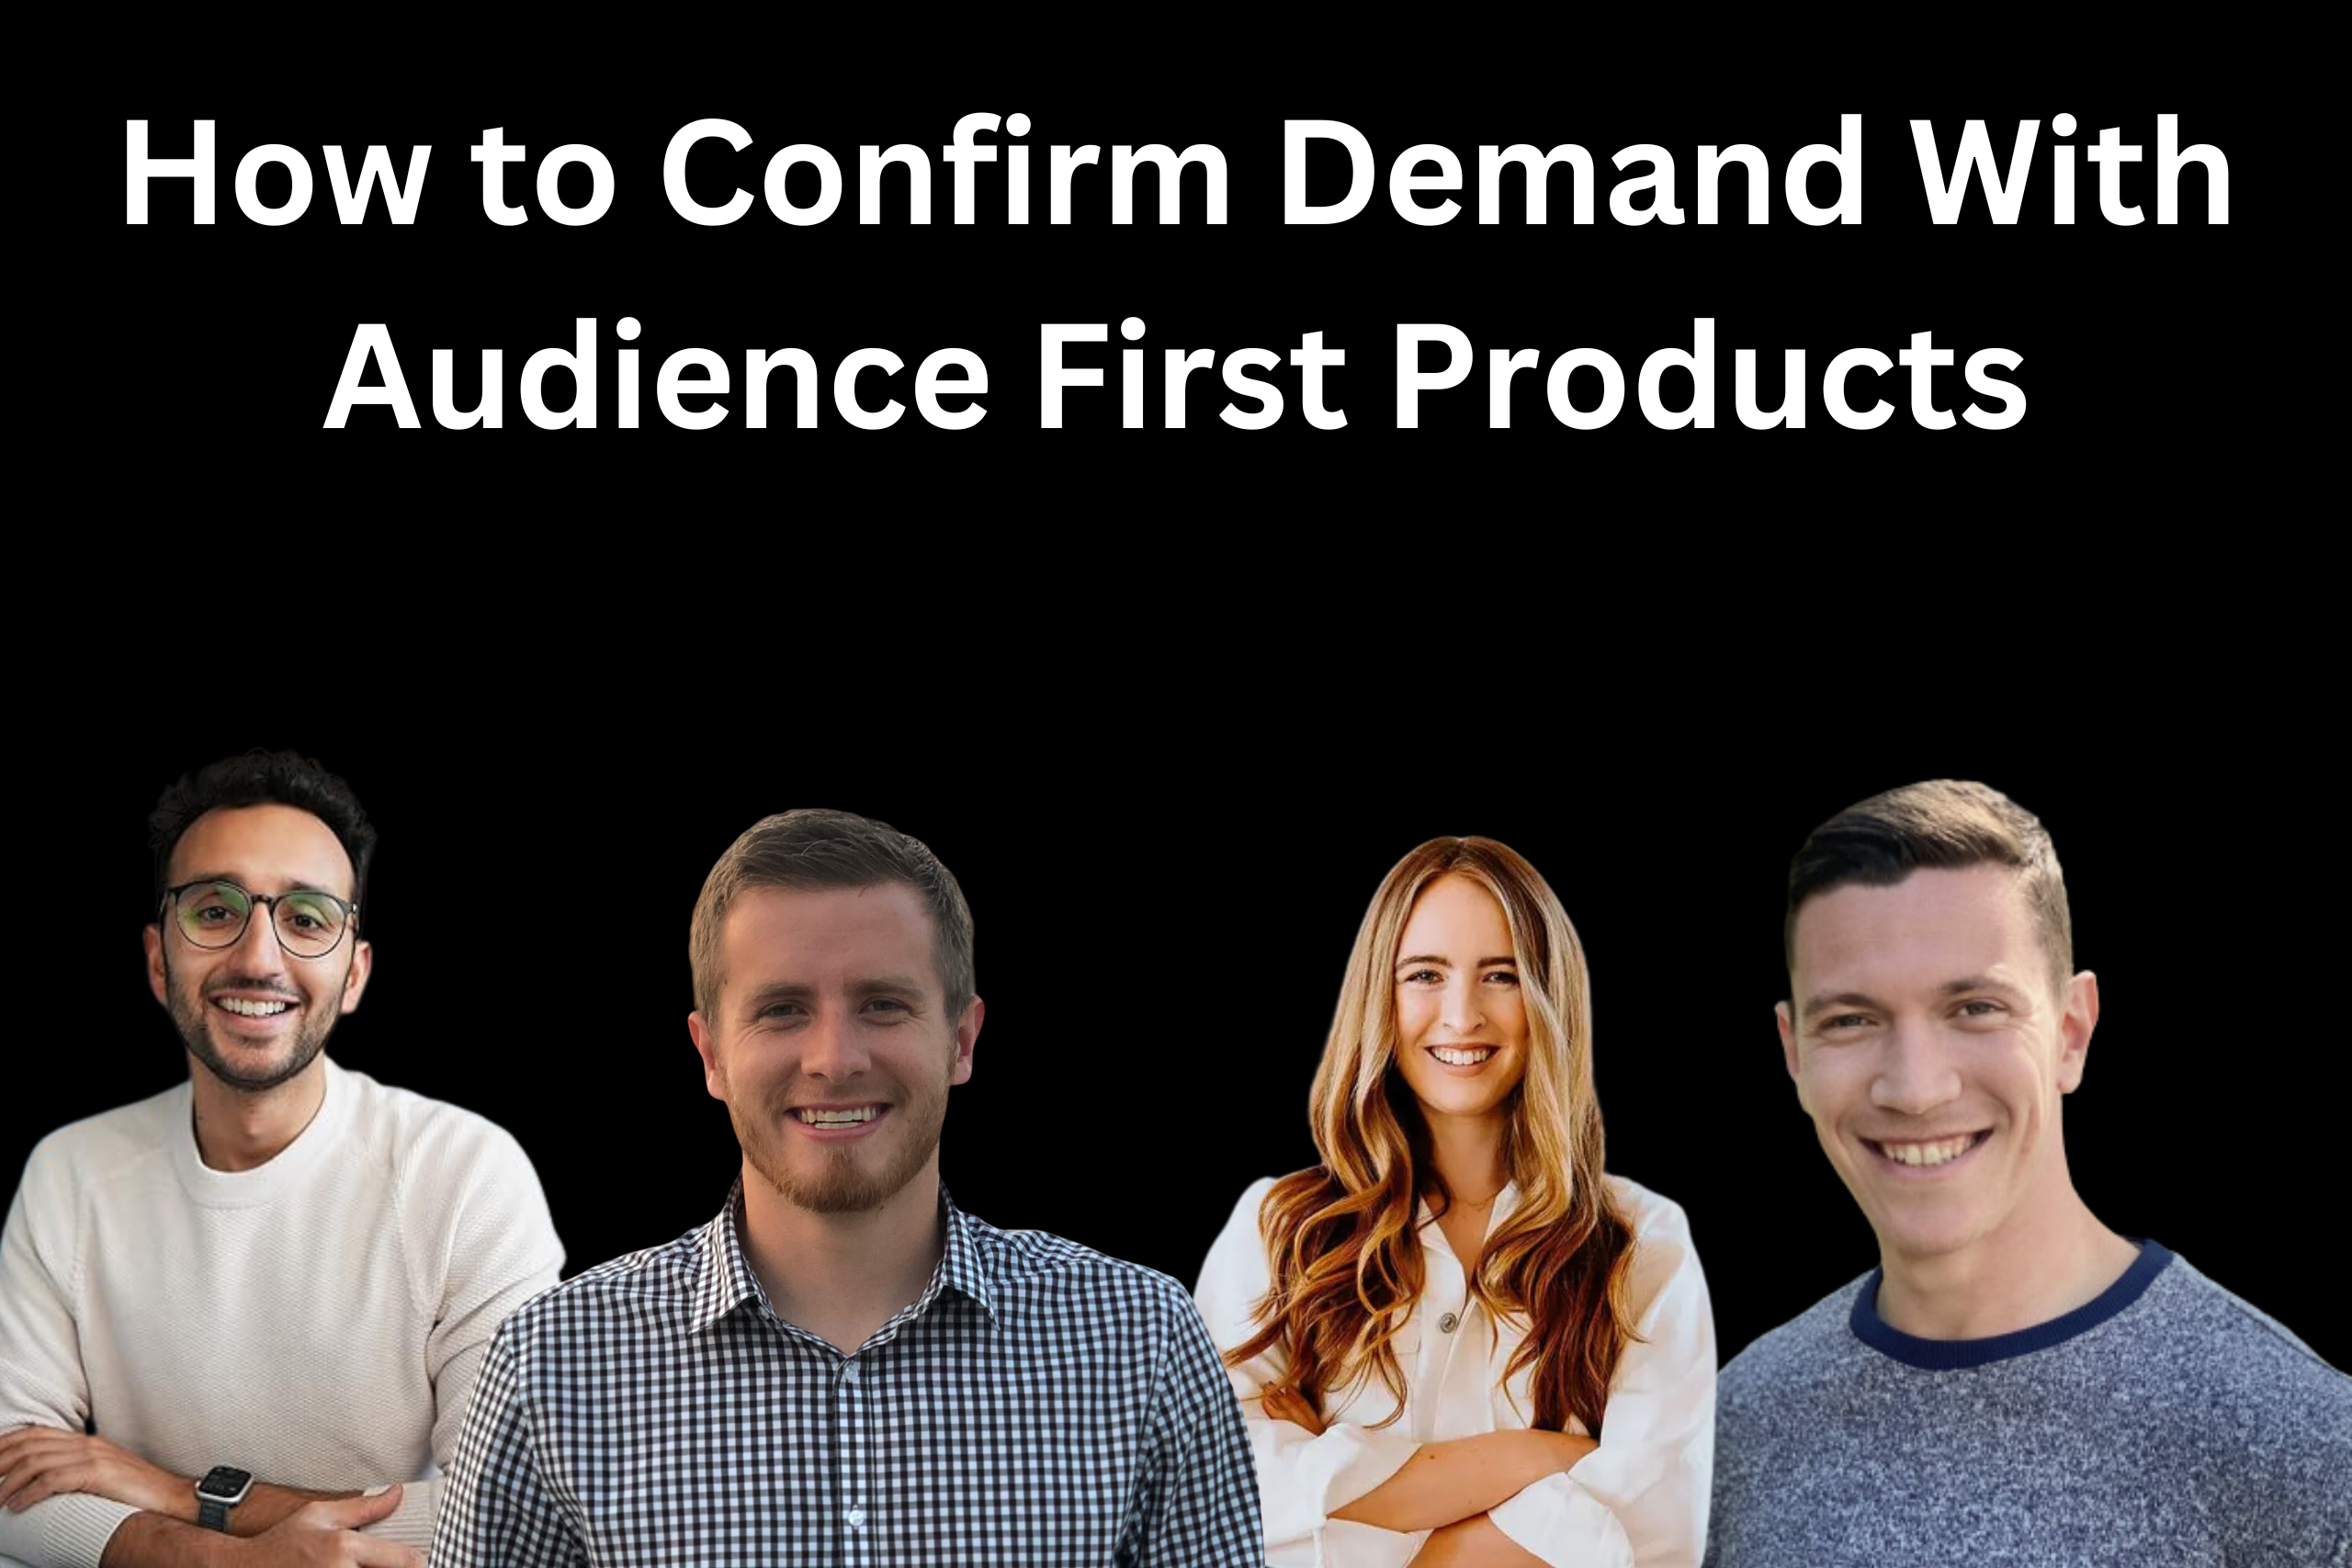 How to confirm demand with audience first products